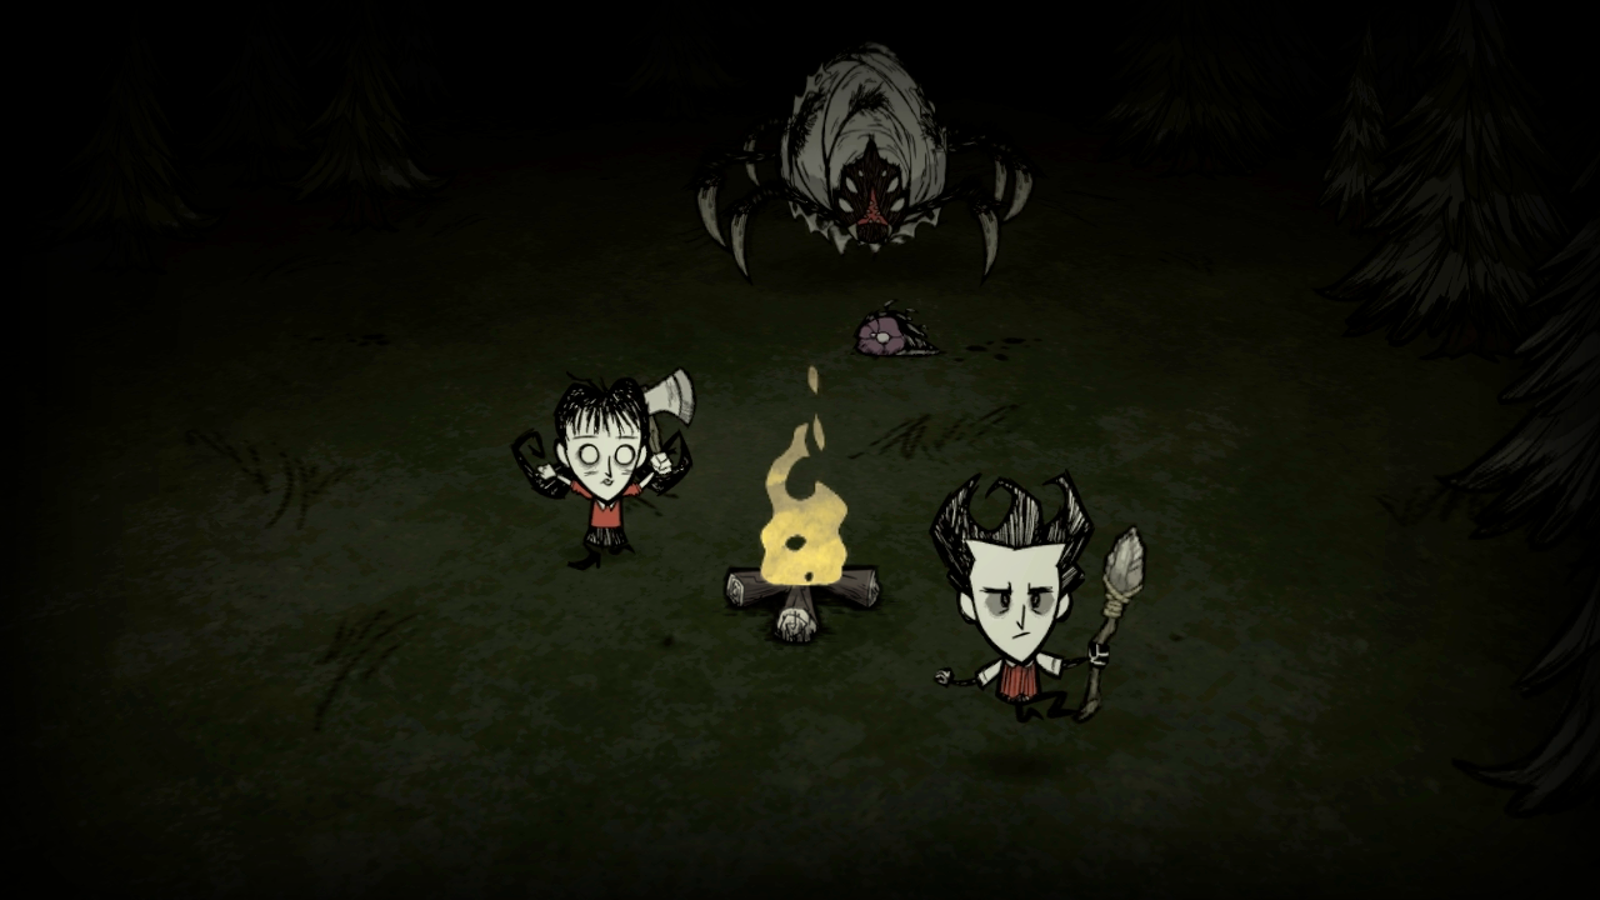 Don t starve основы. Донт Стар тугезе. Don't Starve together ПС 4. Казан don't Starve together. Енот don't Starve together.